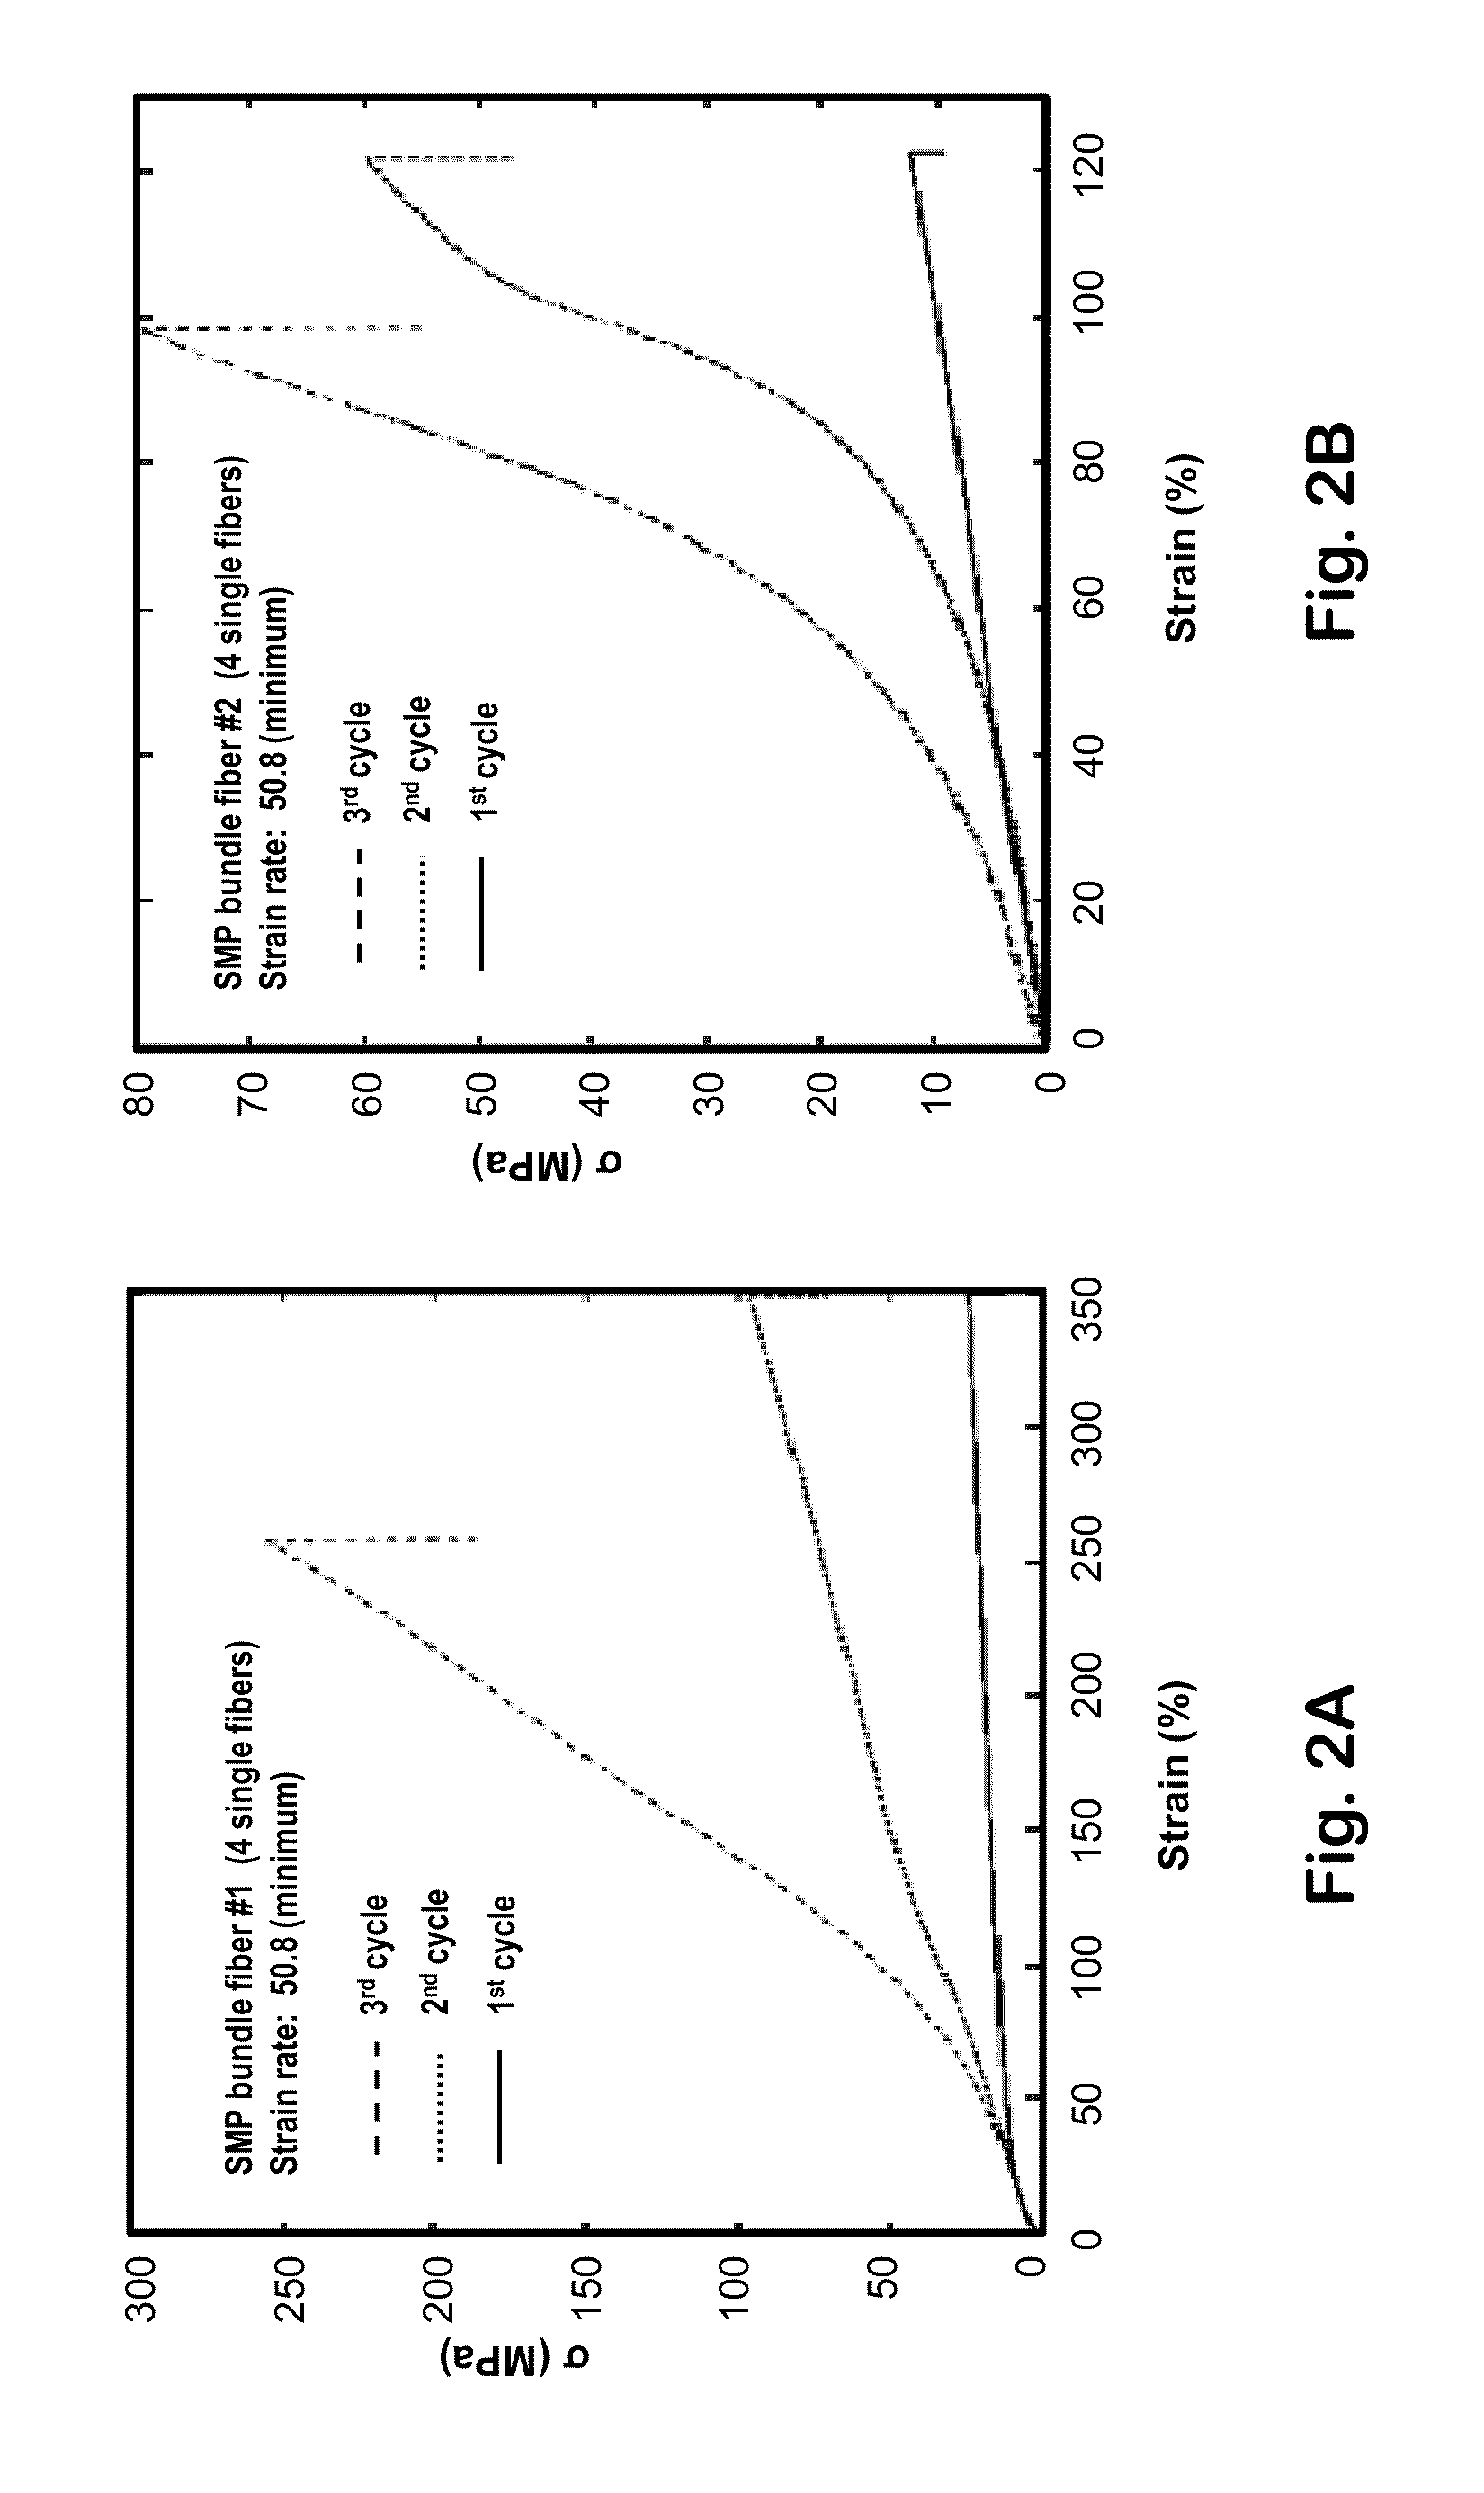 Self-Healing Composite of Thermoset Polymer and Programmed Super Contraction Fibers